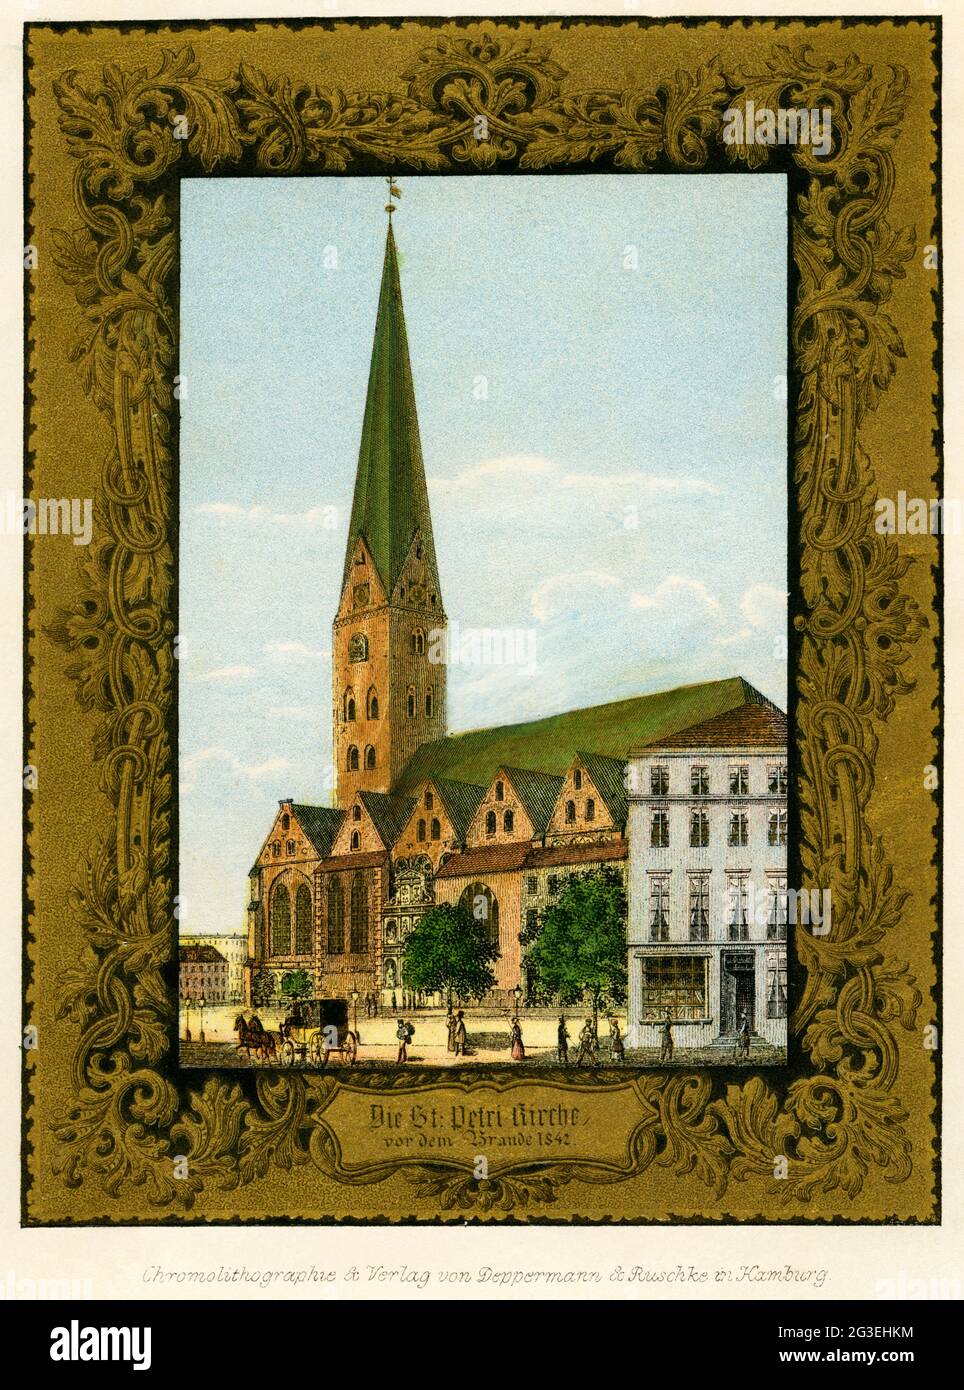 Germany, Hamburg, St. Peter's Church before 1842, coloured lithography by Deppermann & Ruschke, ADDITIONAL-RIGHTS-CLEARANCE-INFO-NOT-AVAILABLE Stock Photo